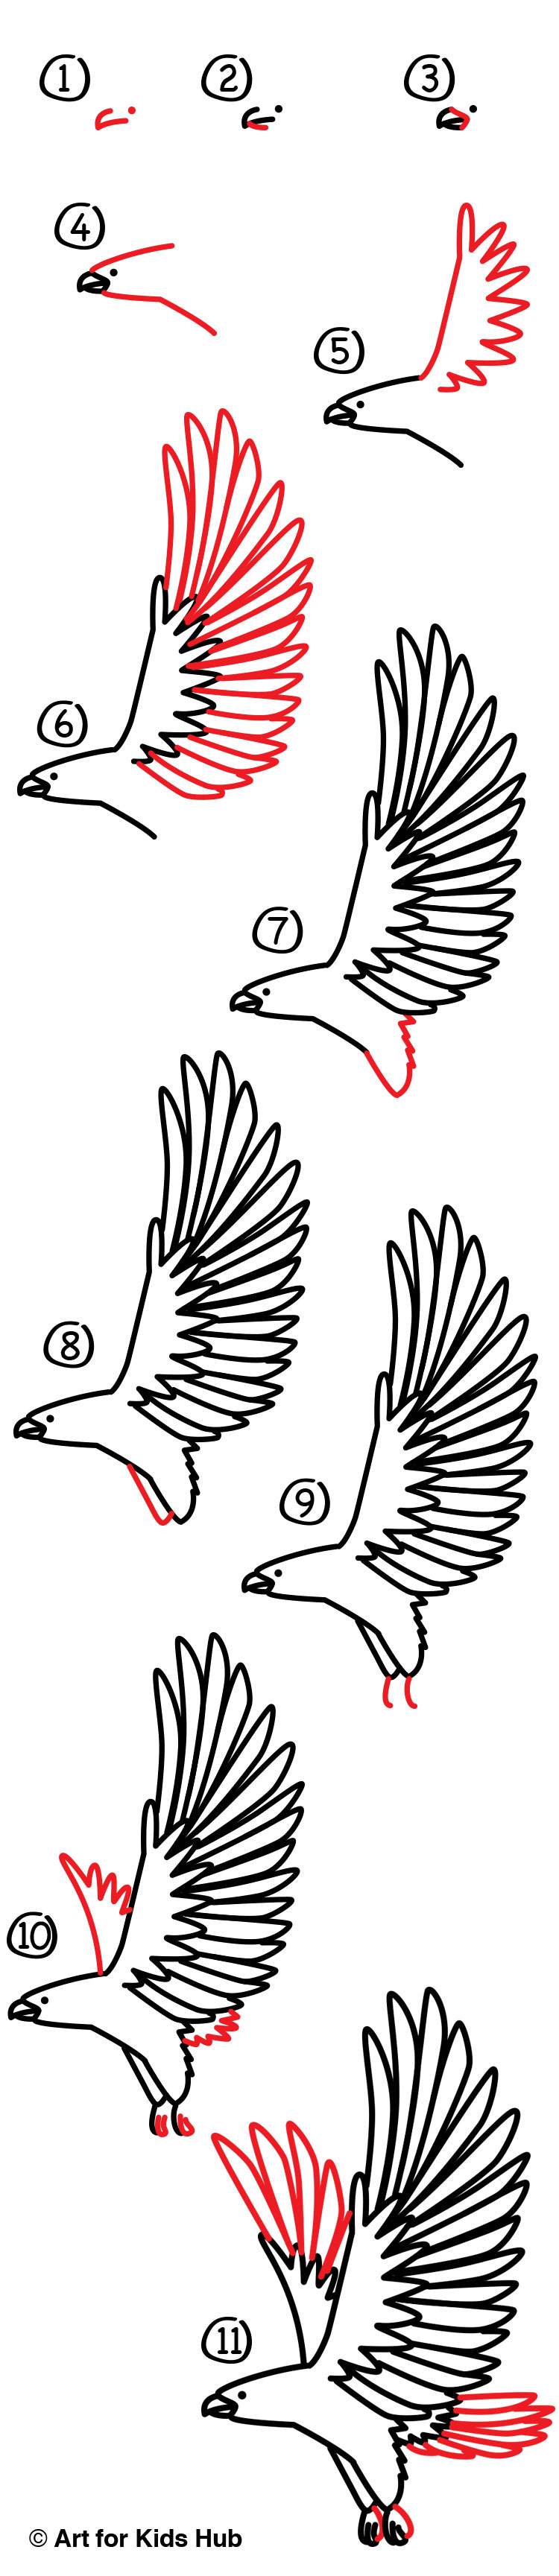 Best How To Draw A Hawk of the decade Check it out now 